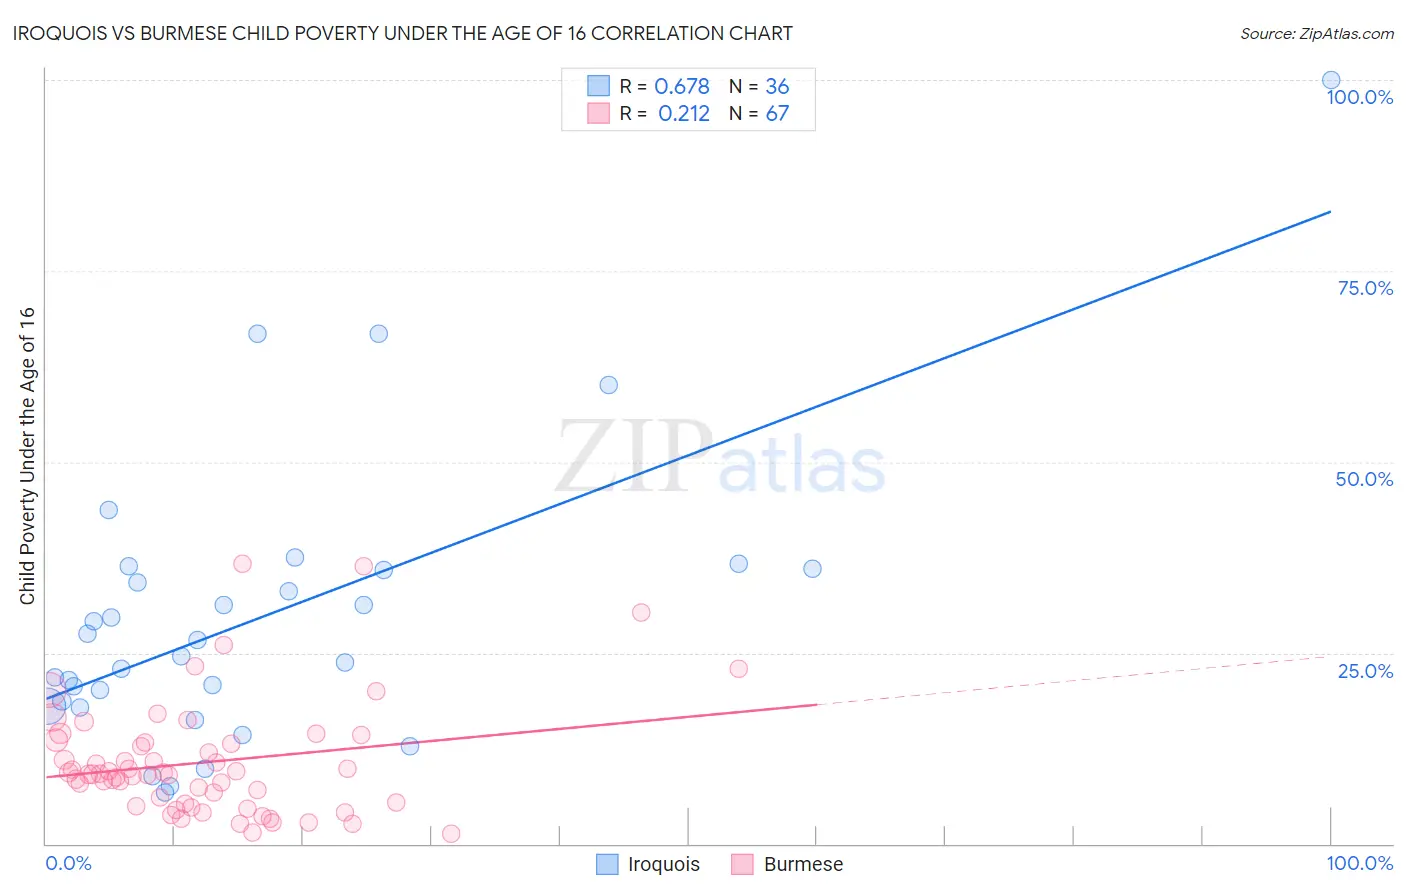 Iroquois vs Burmese Child Poverty Under the Age of 16